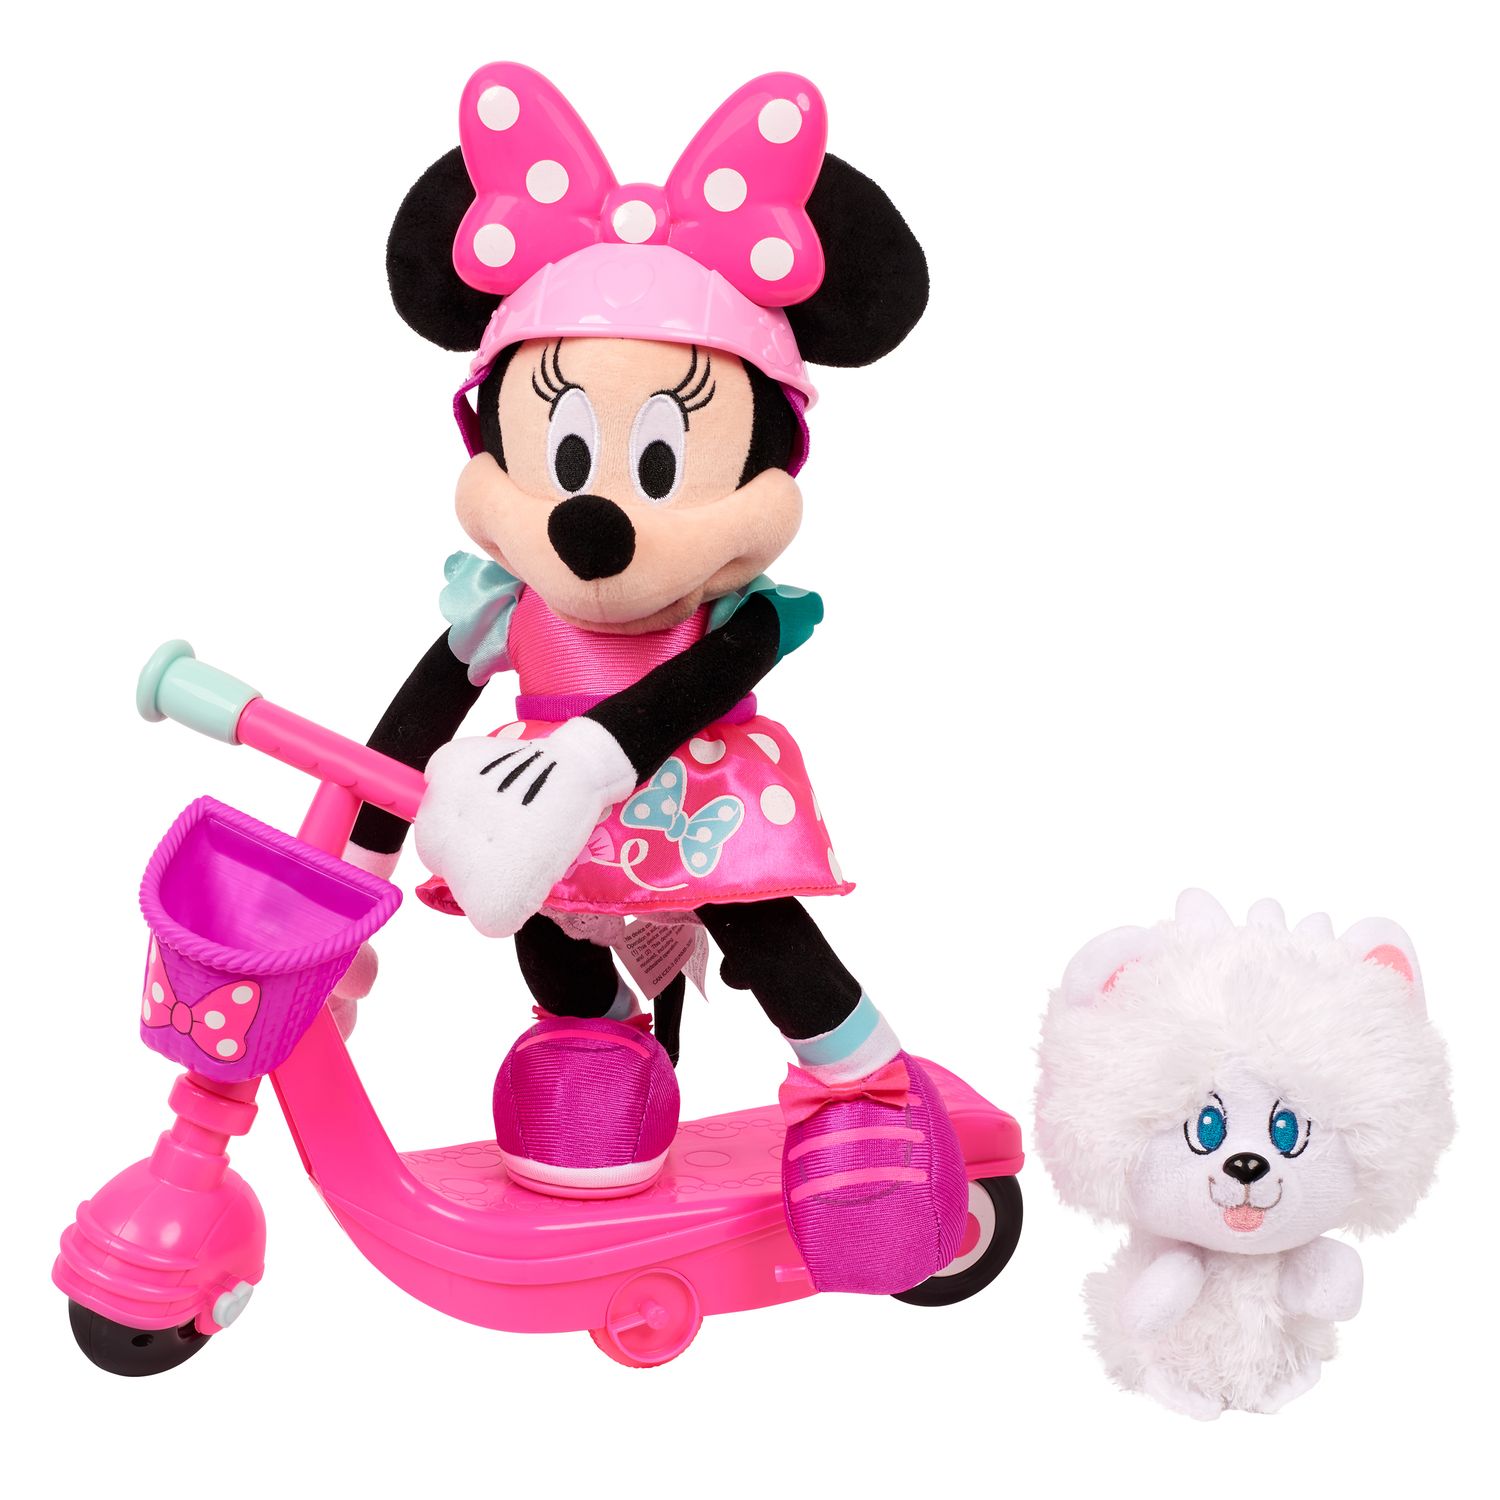 minnie sing and spin scooter